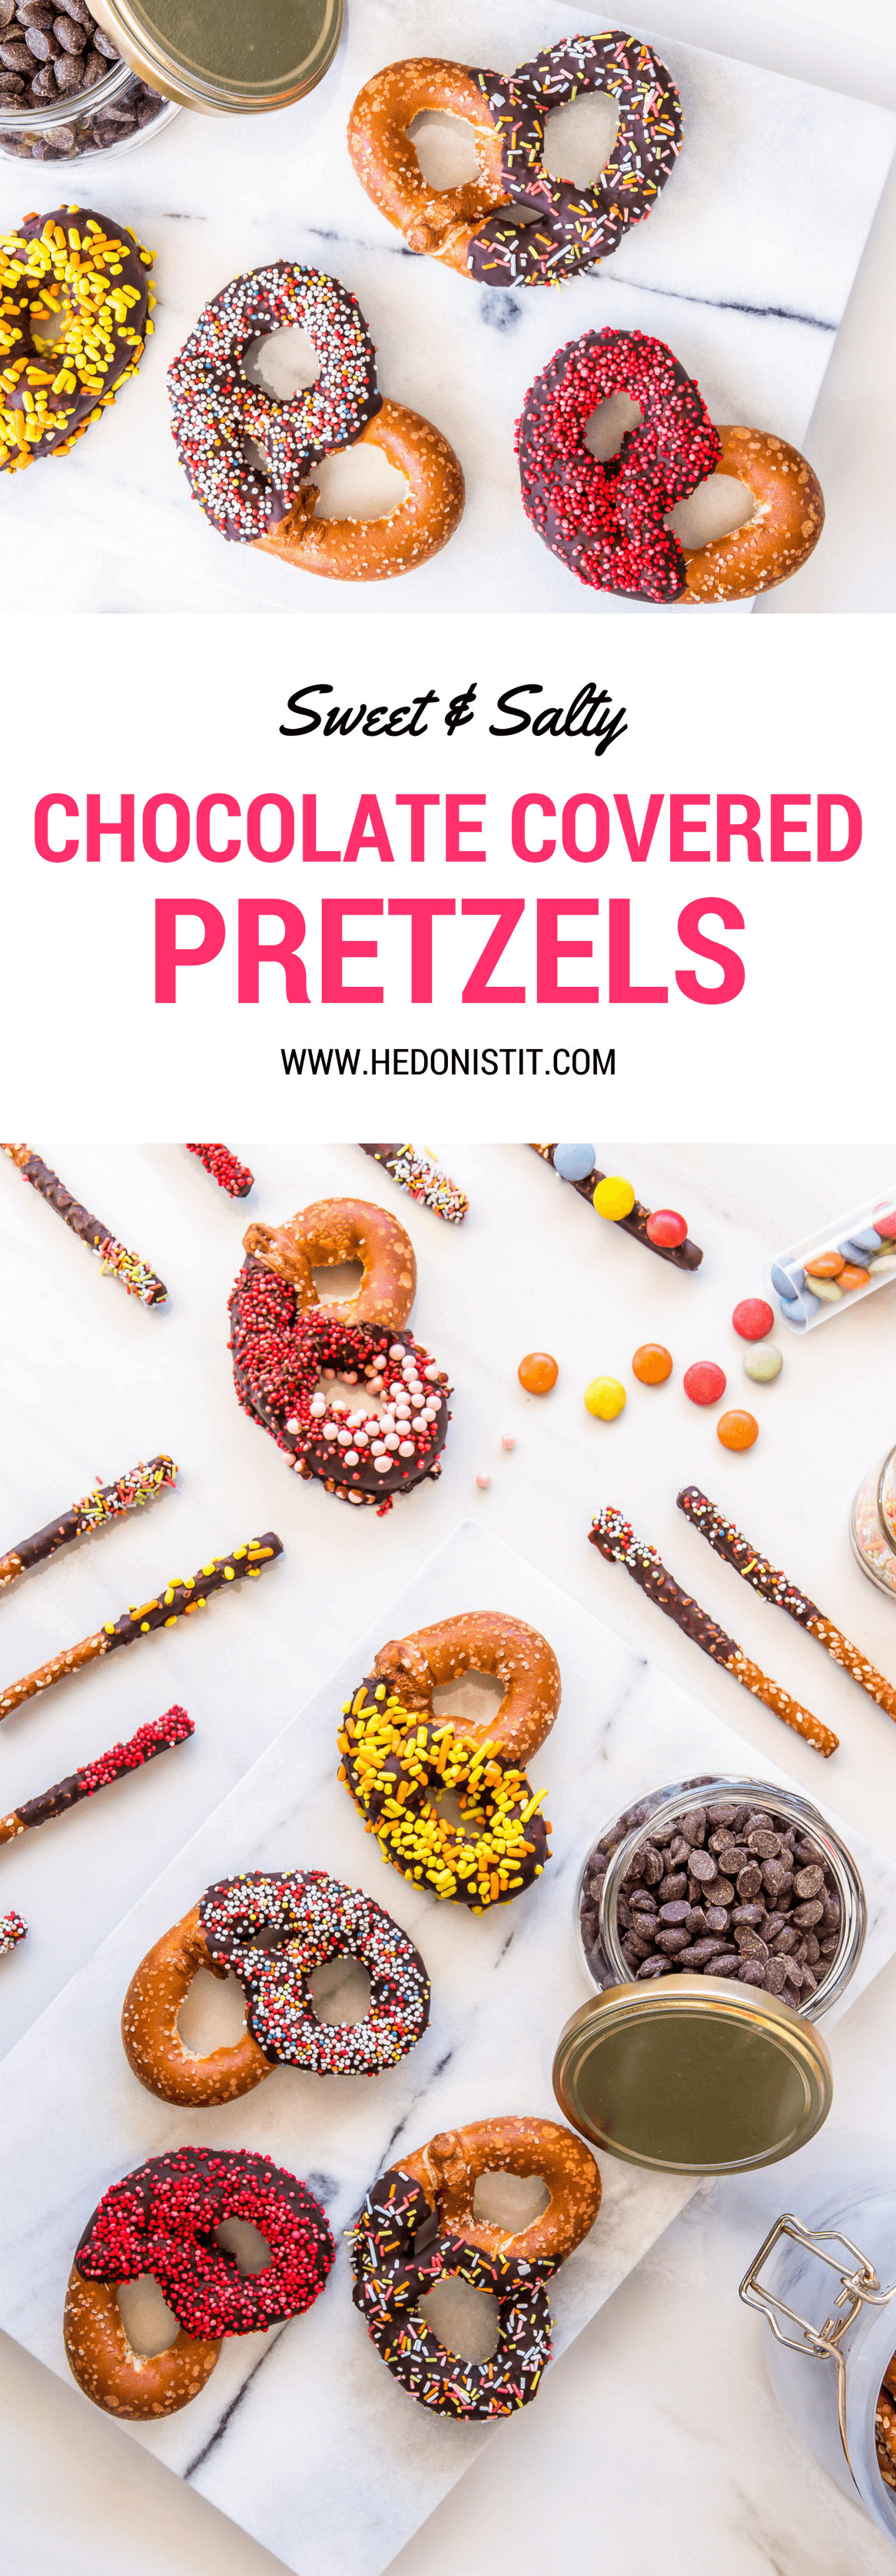 The best party snack and holiday gift! Chocolate covered pretzels recipe - so easy to make at home!